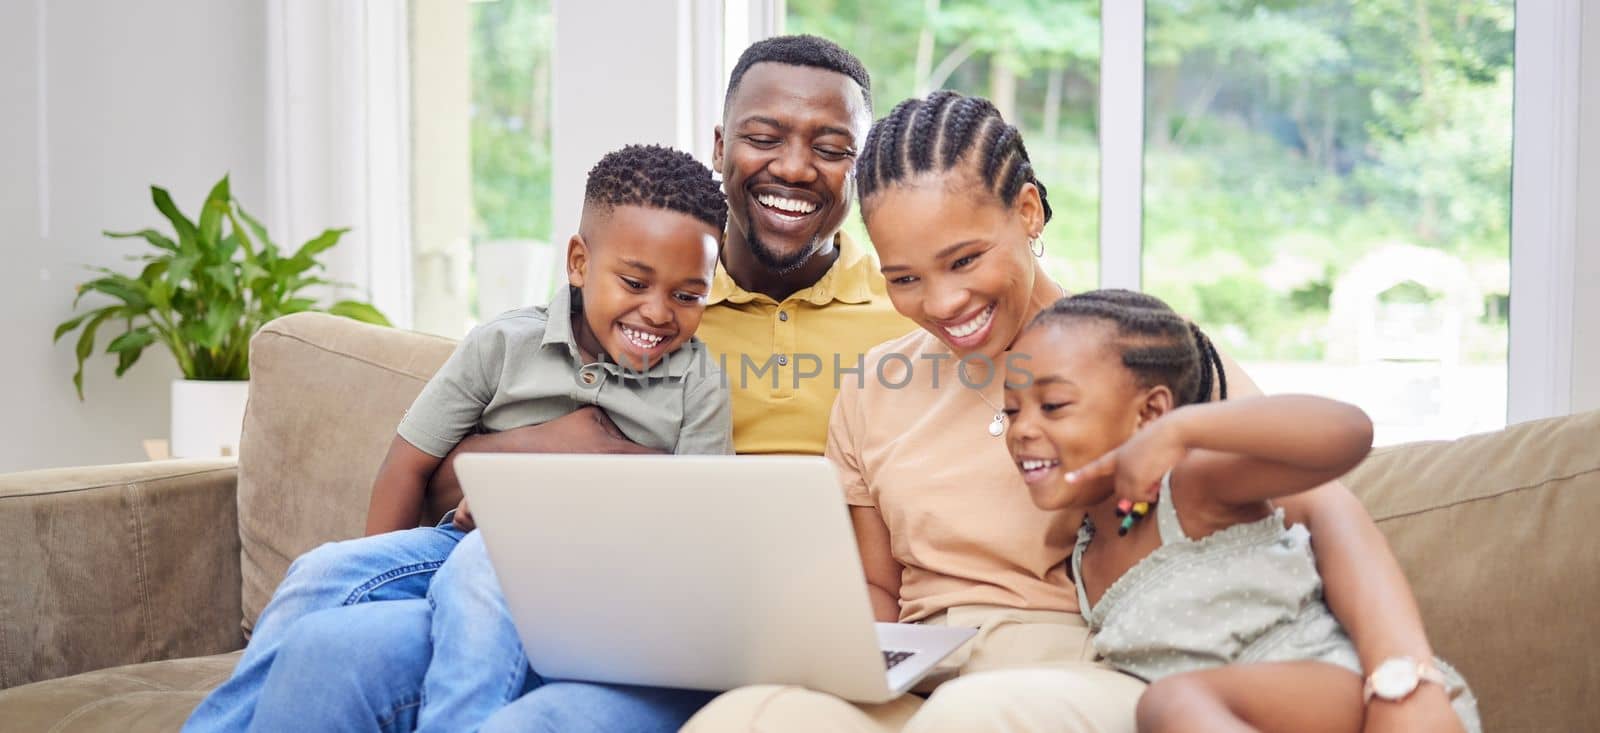 I saw the shorts for this. a young family sitting on the sofa together at home and using a laptop